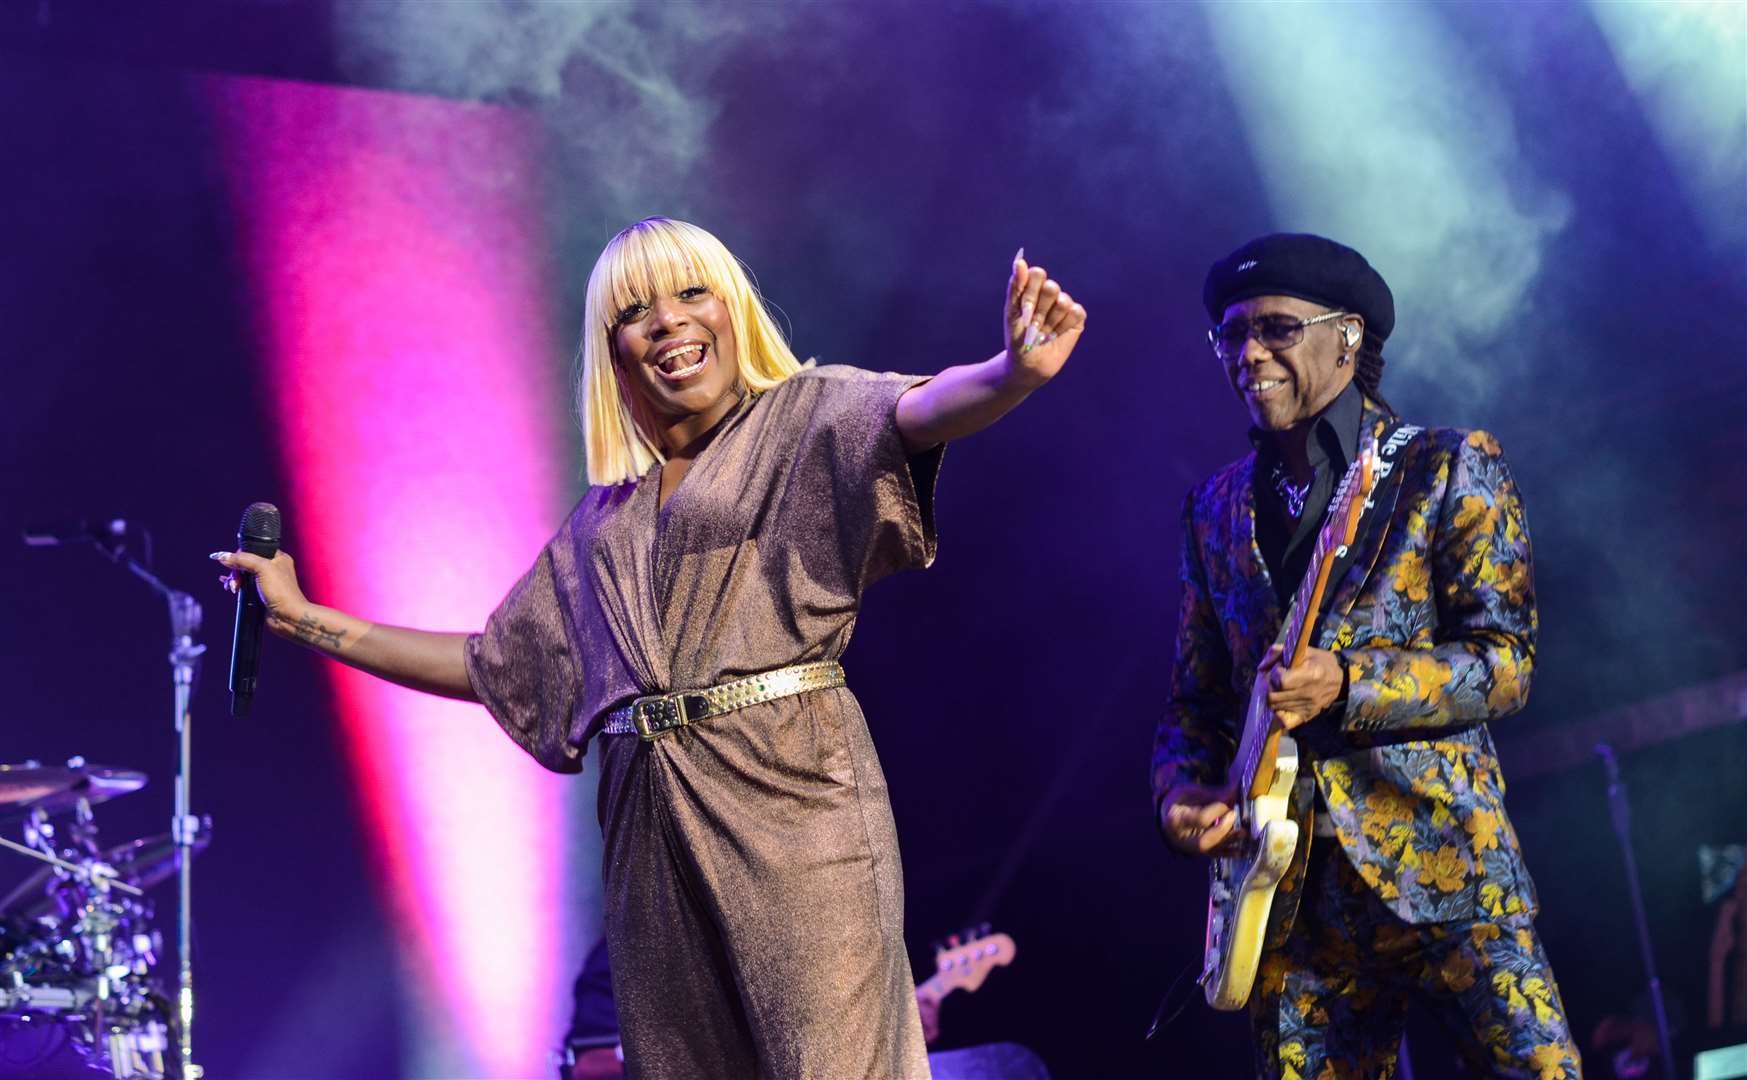 Nile Rodgers and Chic will be performing in Rochester this summer